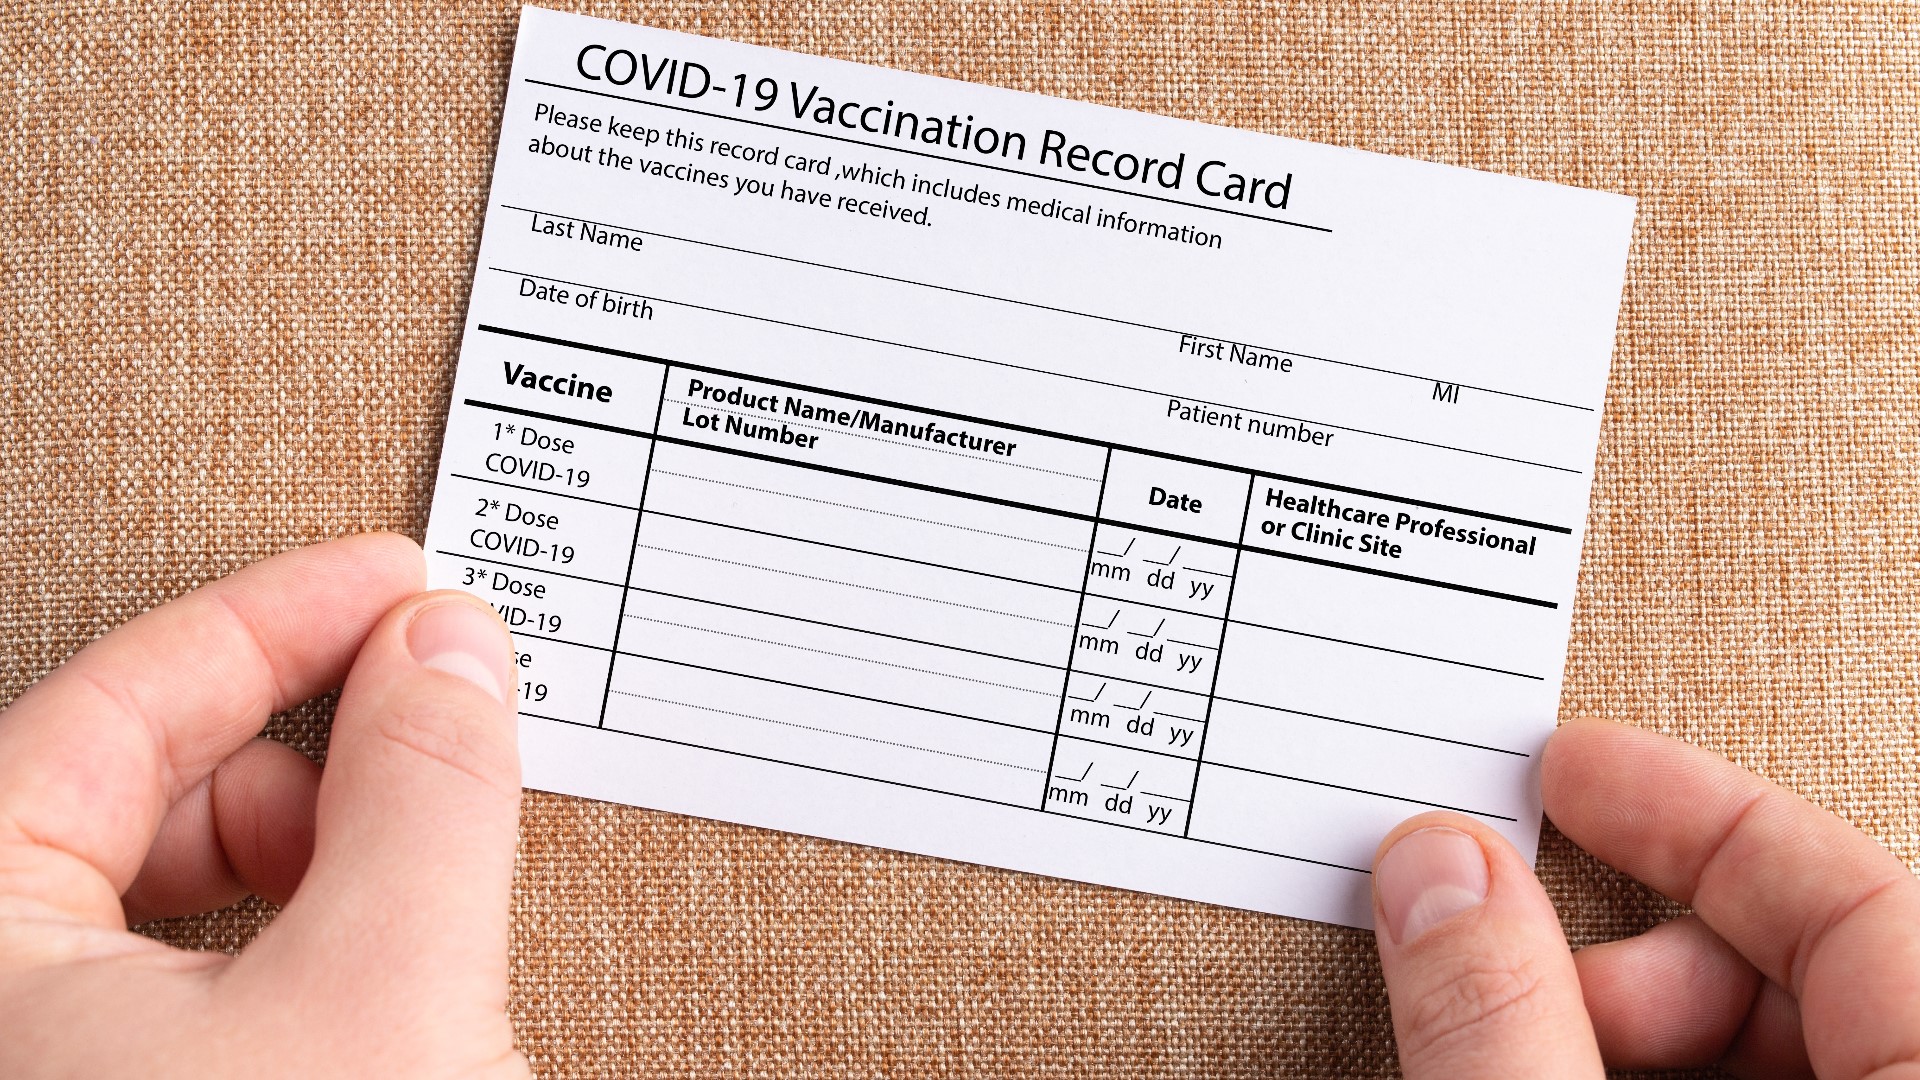 Beginning Oct. 25, people who are unvaccinated will need to show a negative COVID-19 test taken within the last 72 hours if they want to dine indoors in King County.